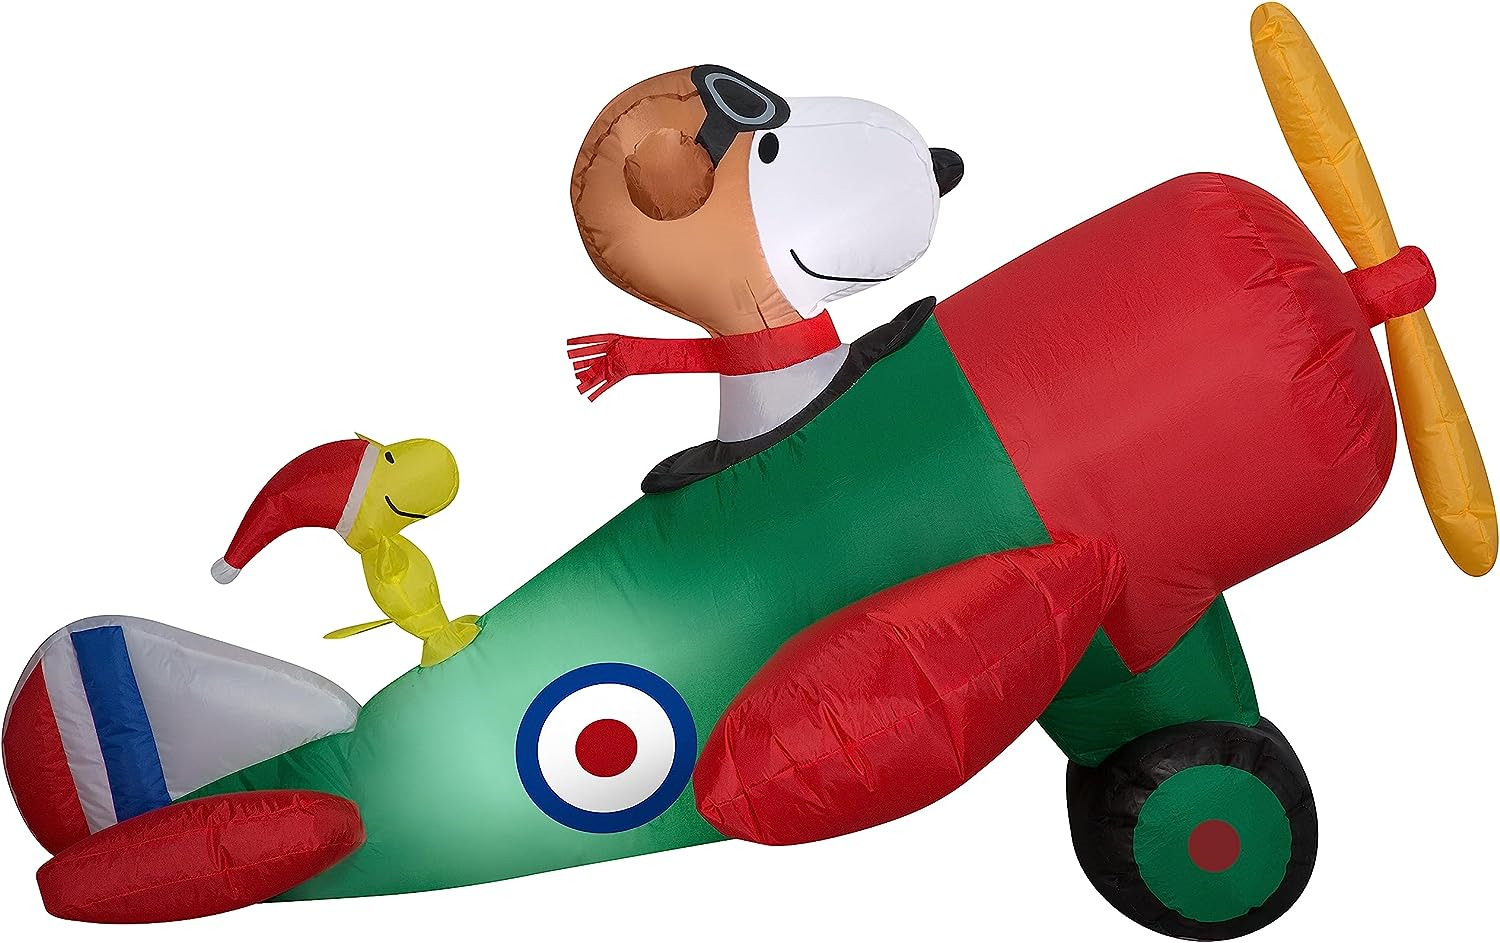 Gemmy Christmas Airblown Inflatable 4.5' Snoopy in Airplane Scene